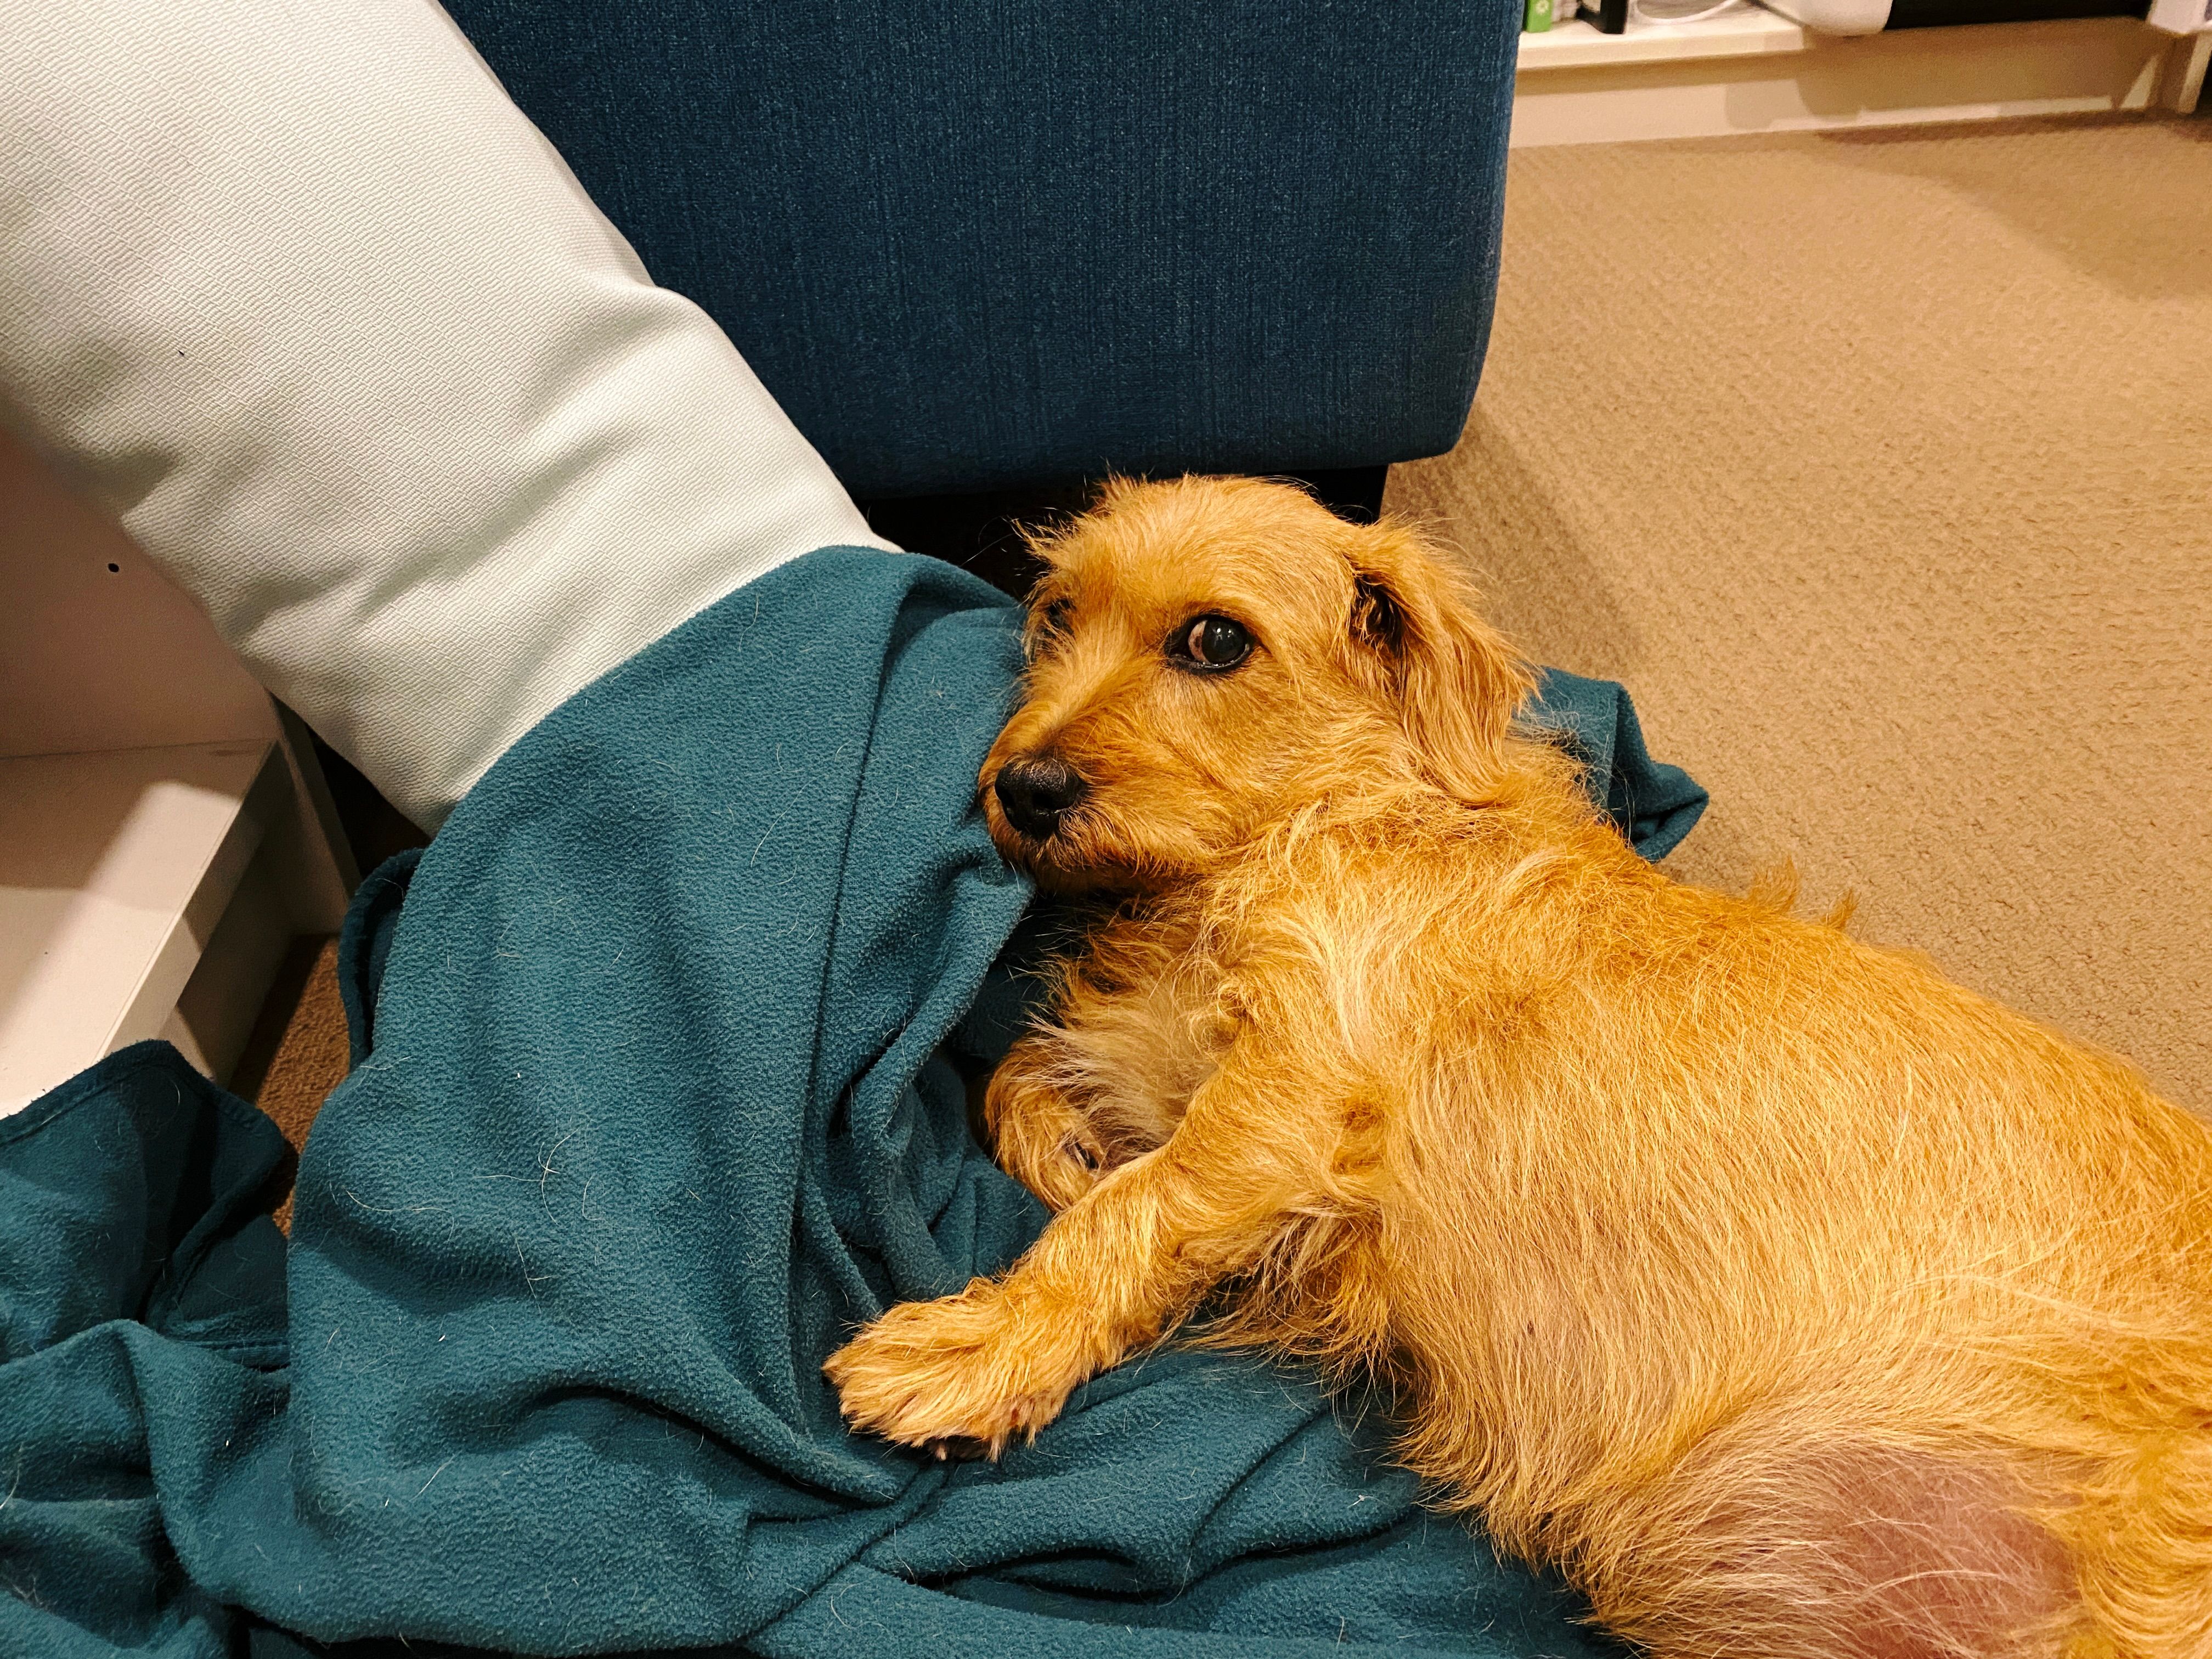 A photo of a small scruffy blonde dog lying on his side on a green blanket with his head propped up against part of it, giving some serious side-eye.